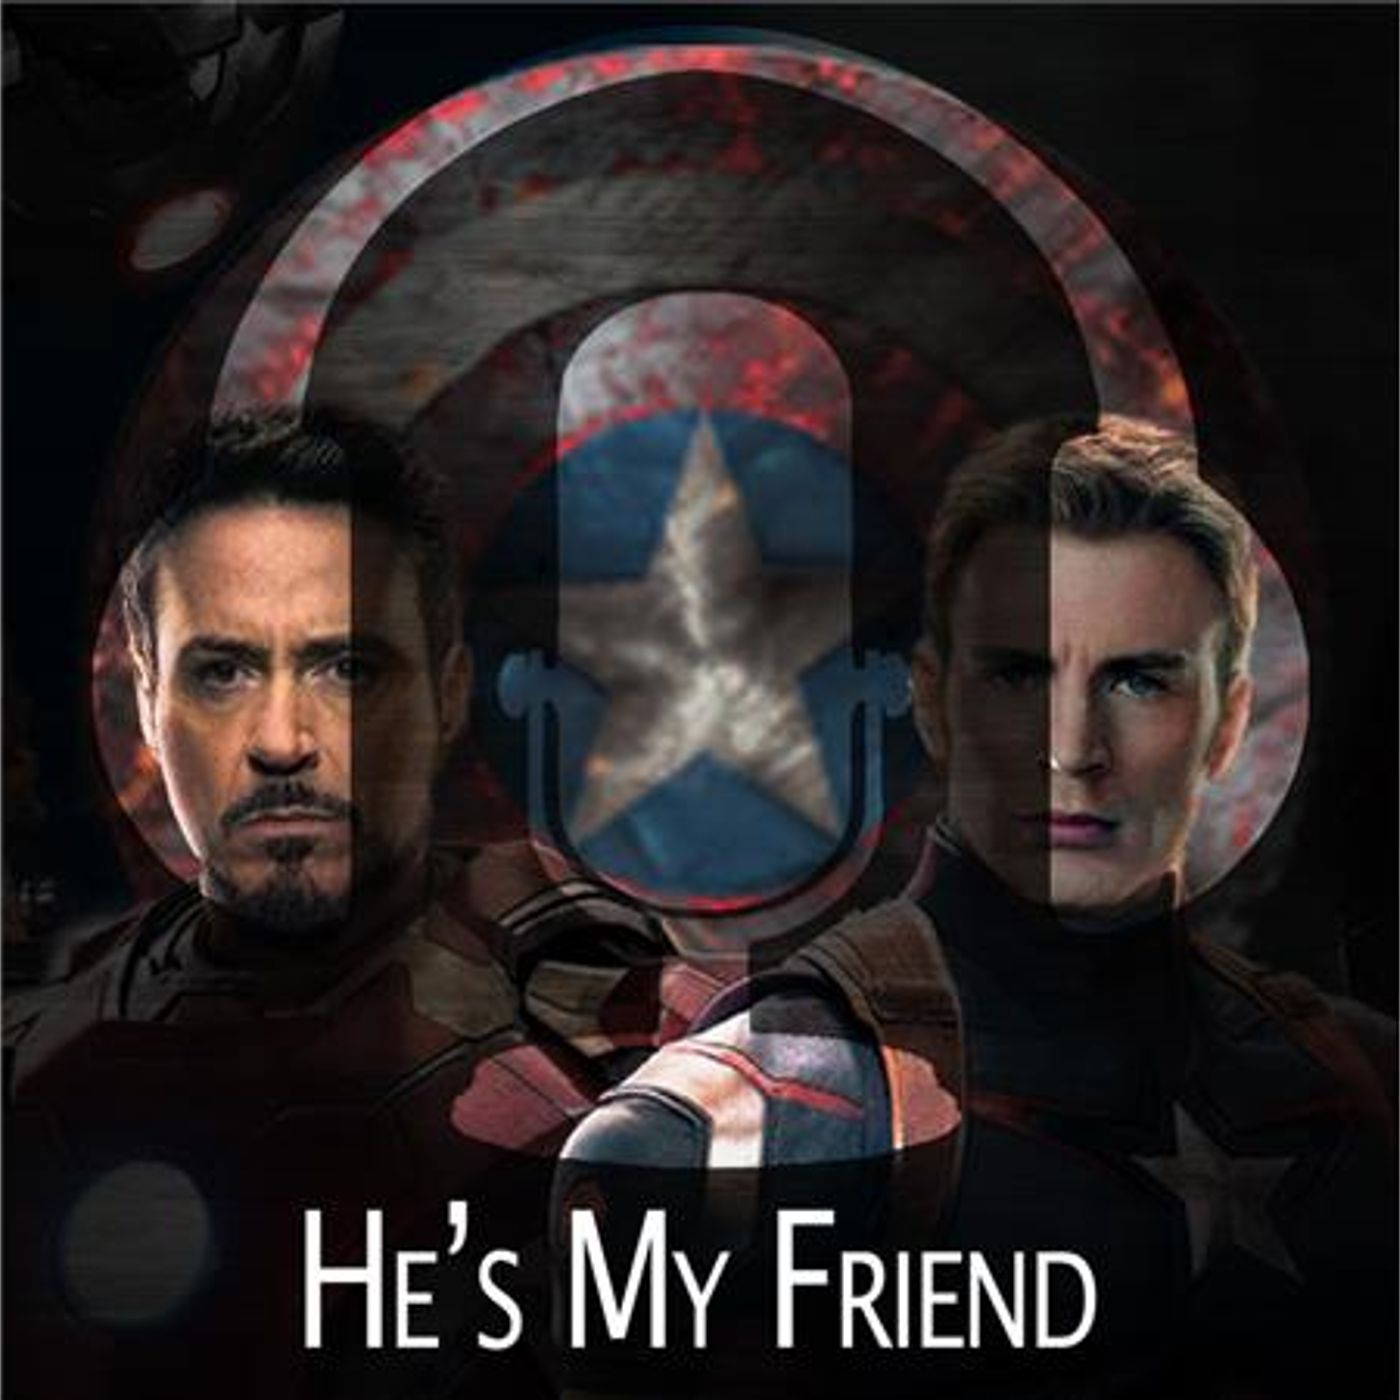 Session 36 - He’s My Friend